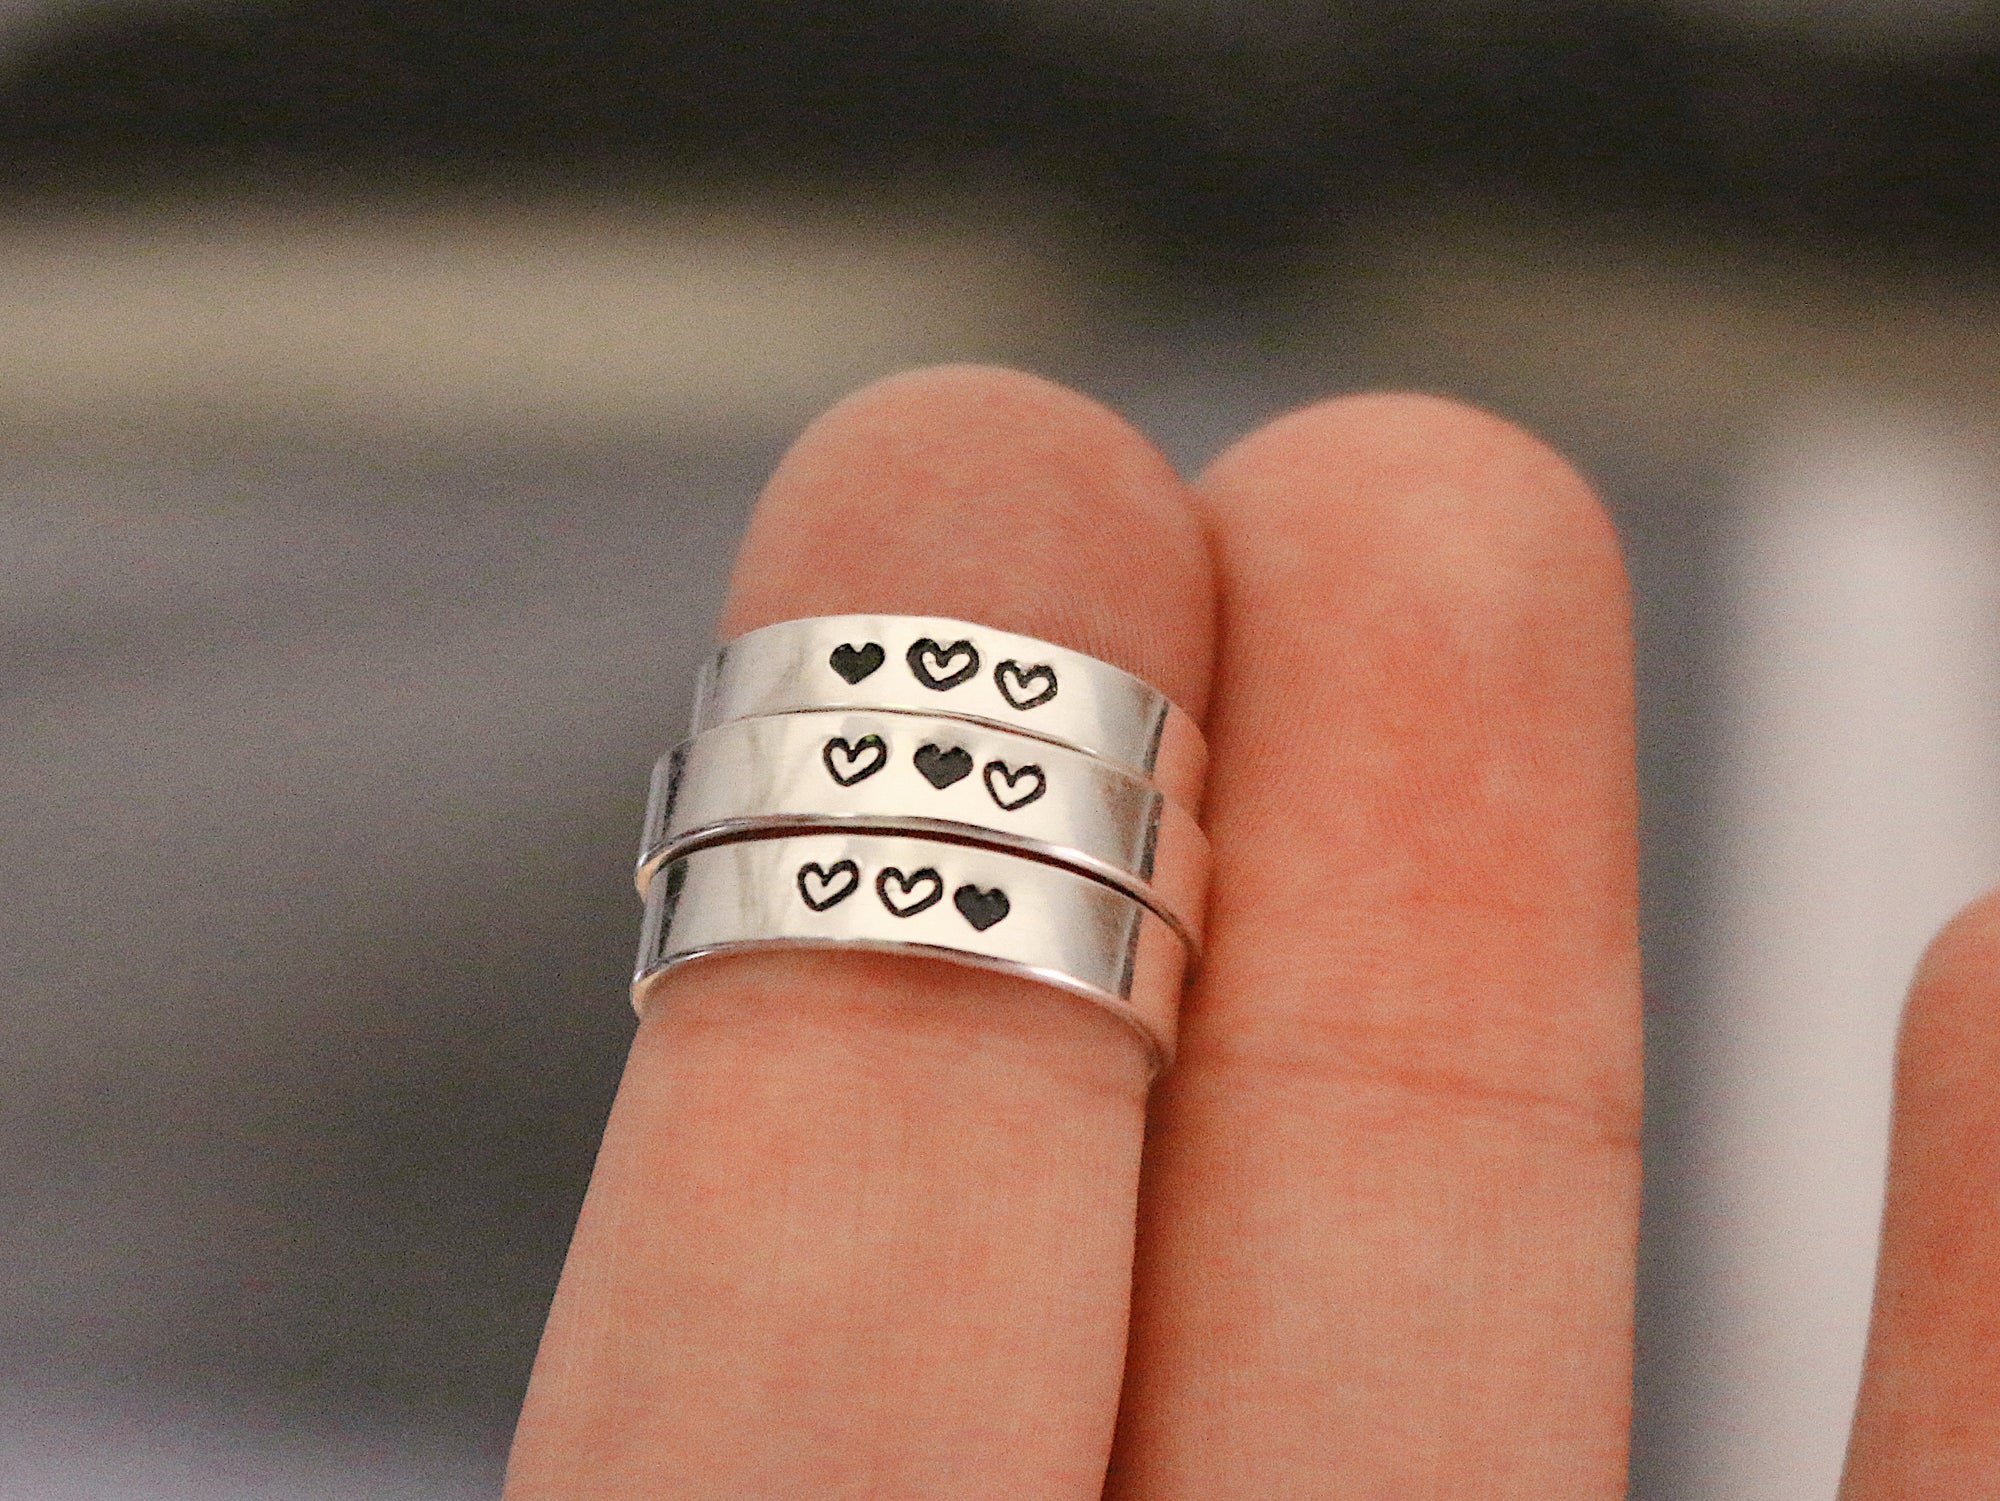 Buy Friendship Rings Matching 2 Ring Double Skeleton Pinky Swear Ring Set Best  Friend Gift Promise Ring Couples Ring Valentines Day Online in India - Etsy